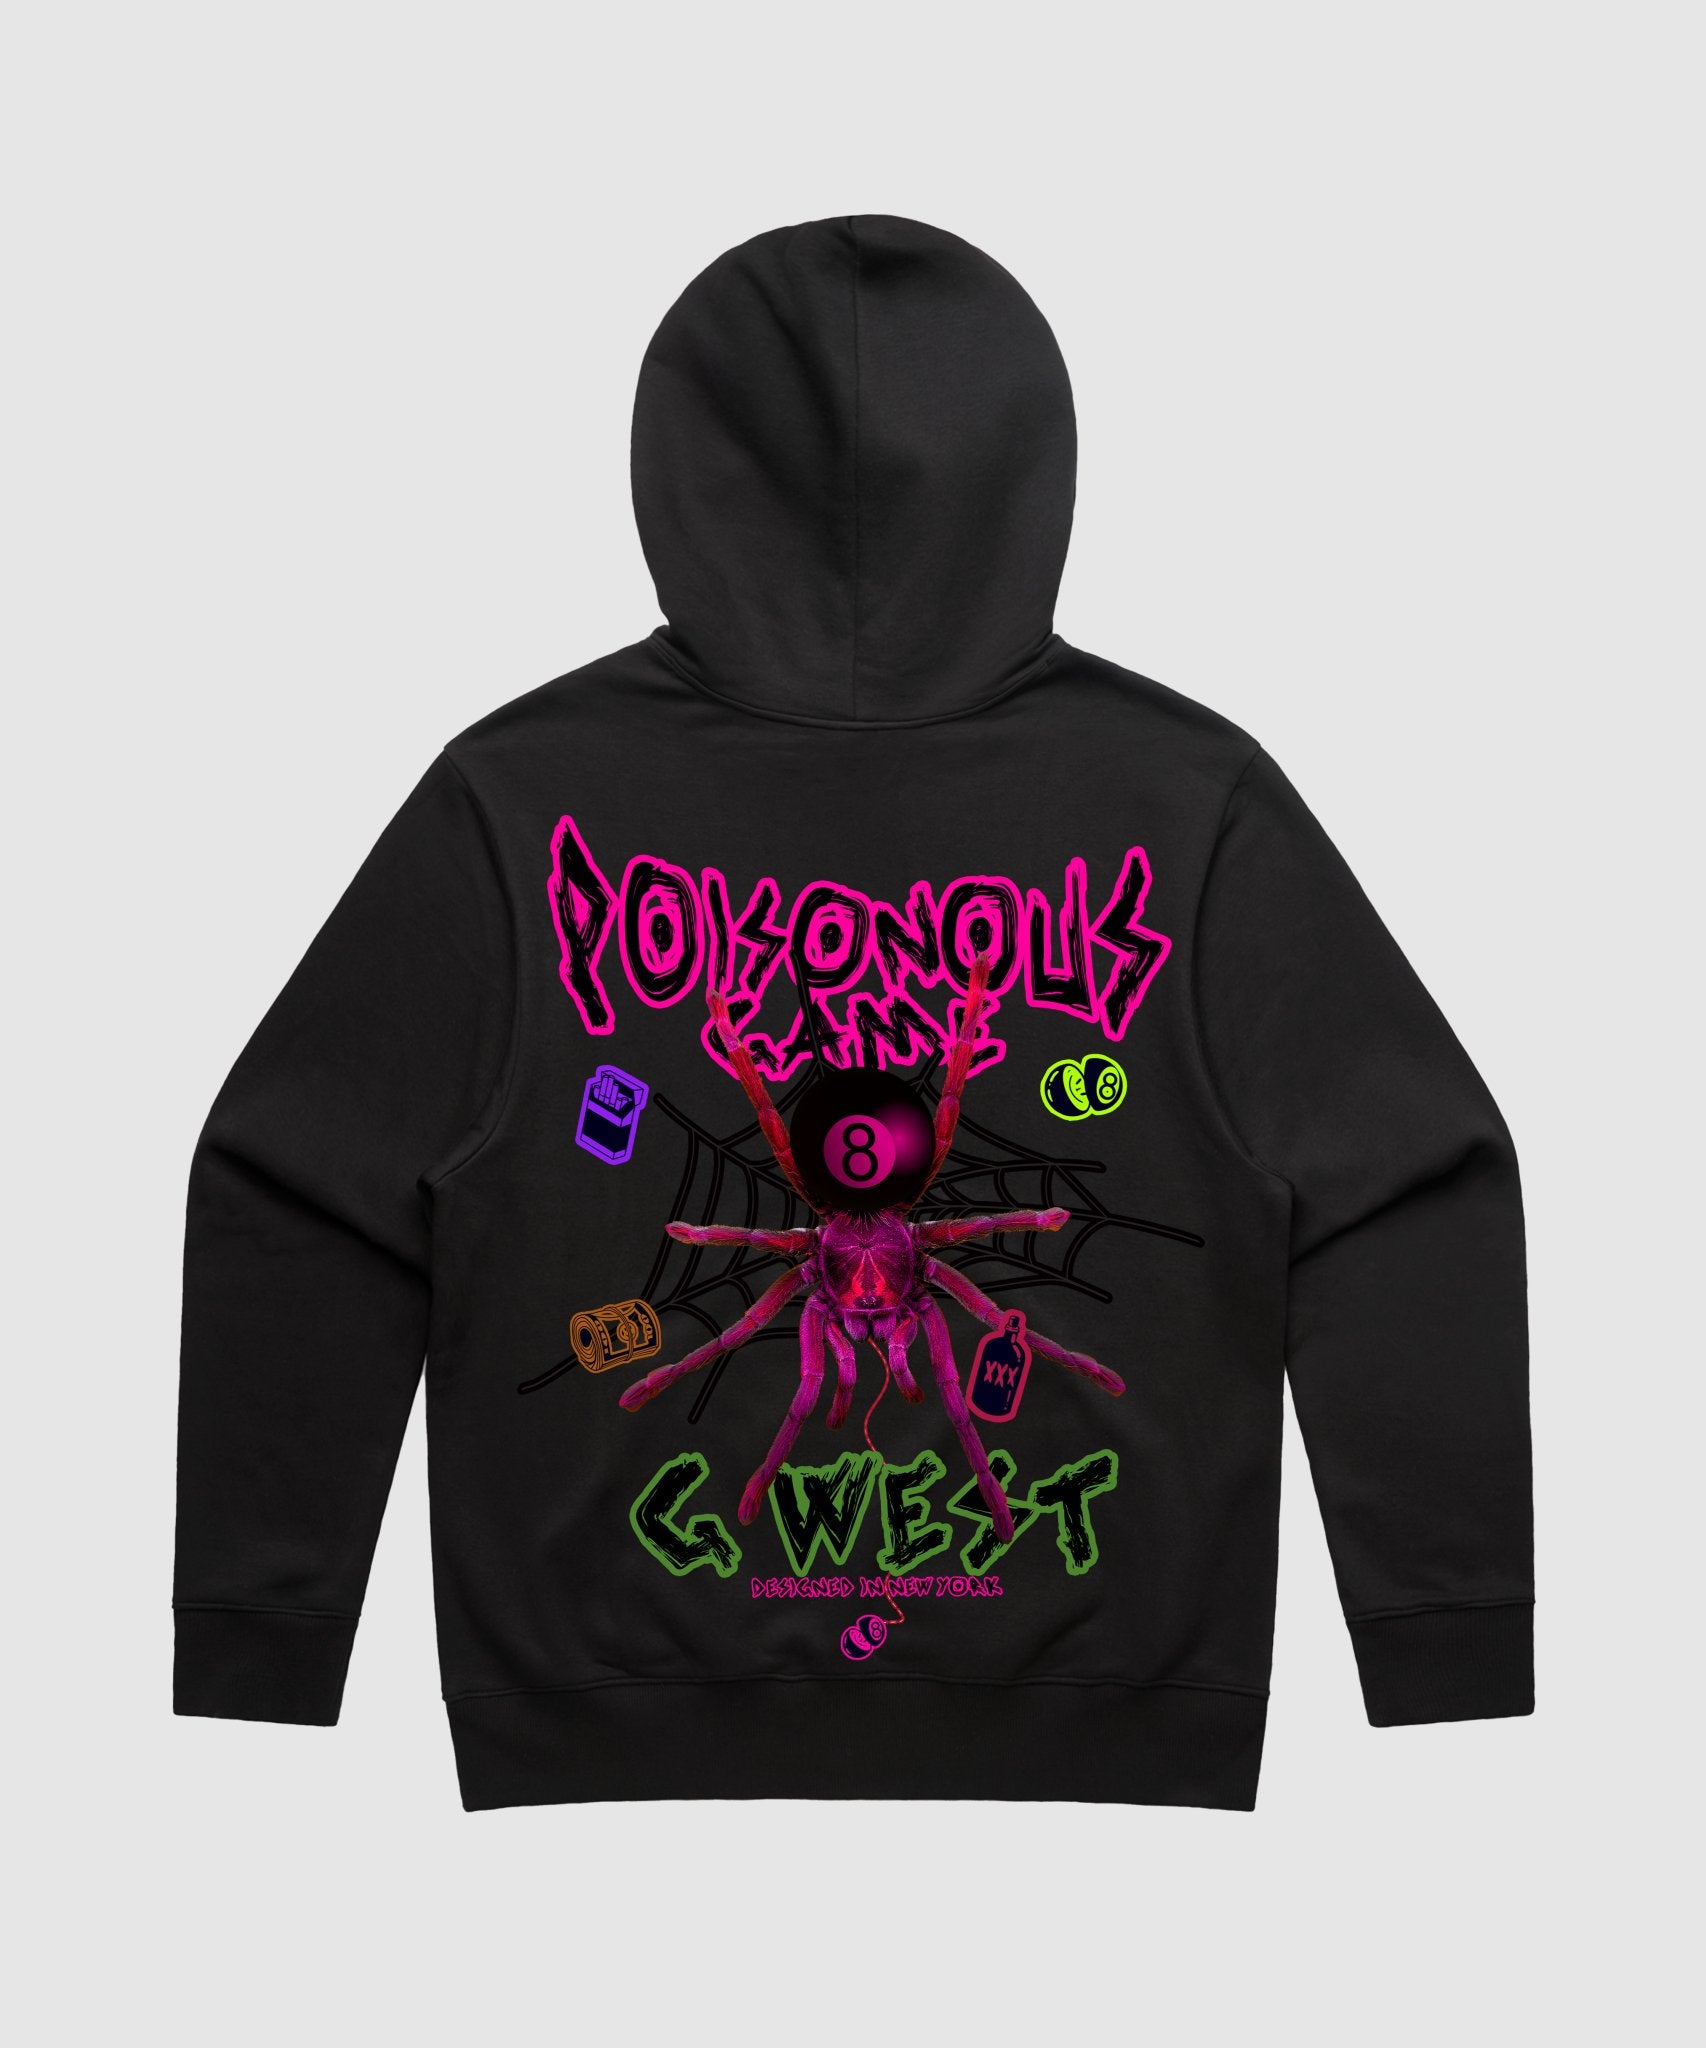 G WEST POISON GAME HEAVY PREMIUM HOODIE - 6 COLORS - G West